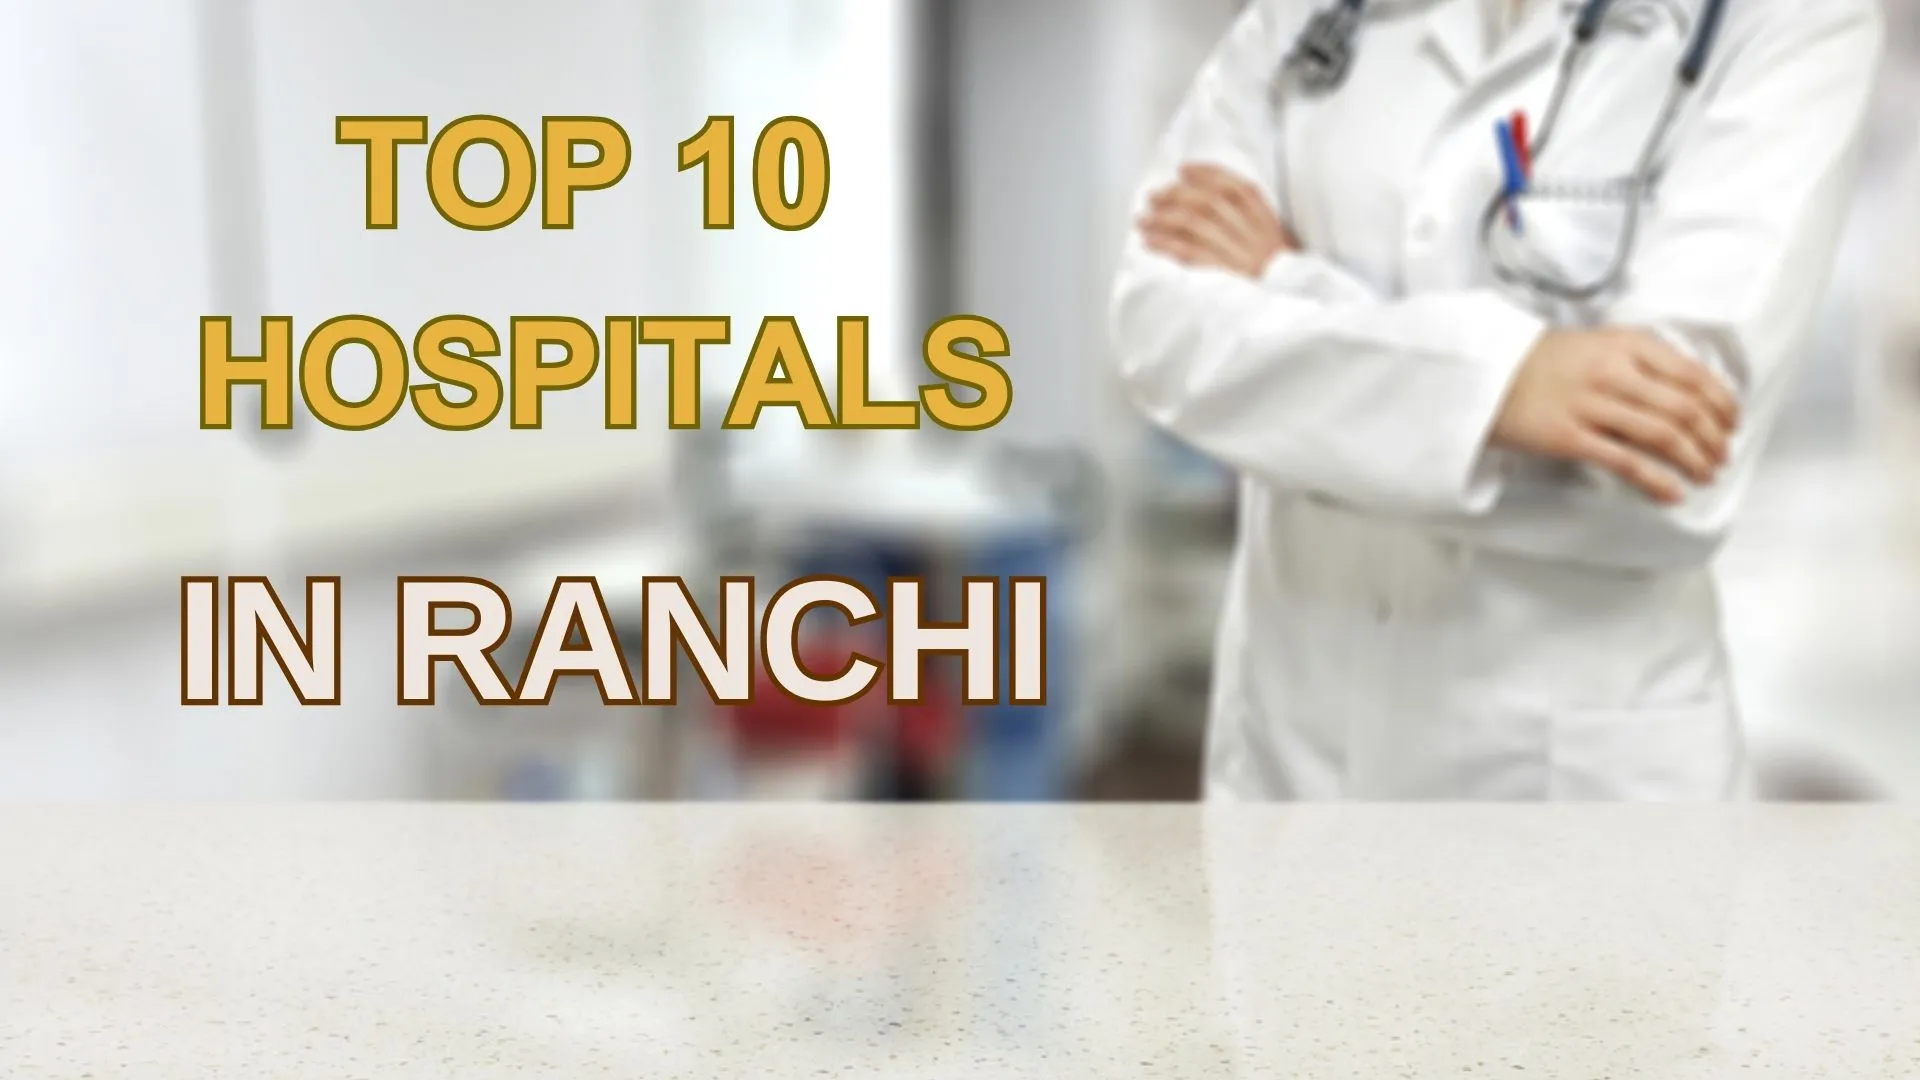 Discover the Top 10 Hospitals in Ranchi for Quality Healthcare